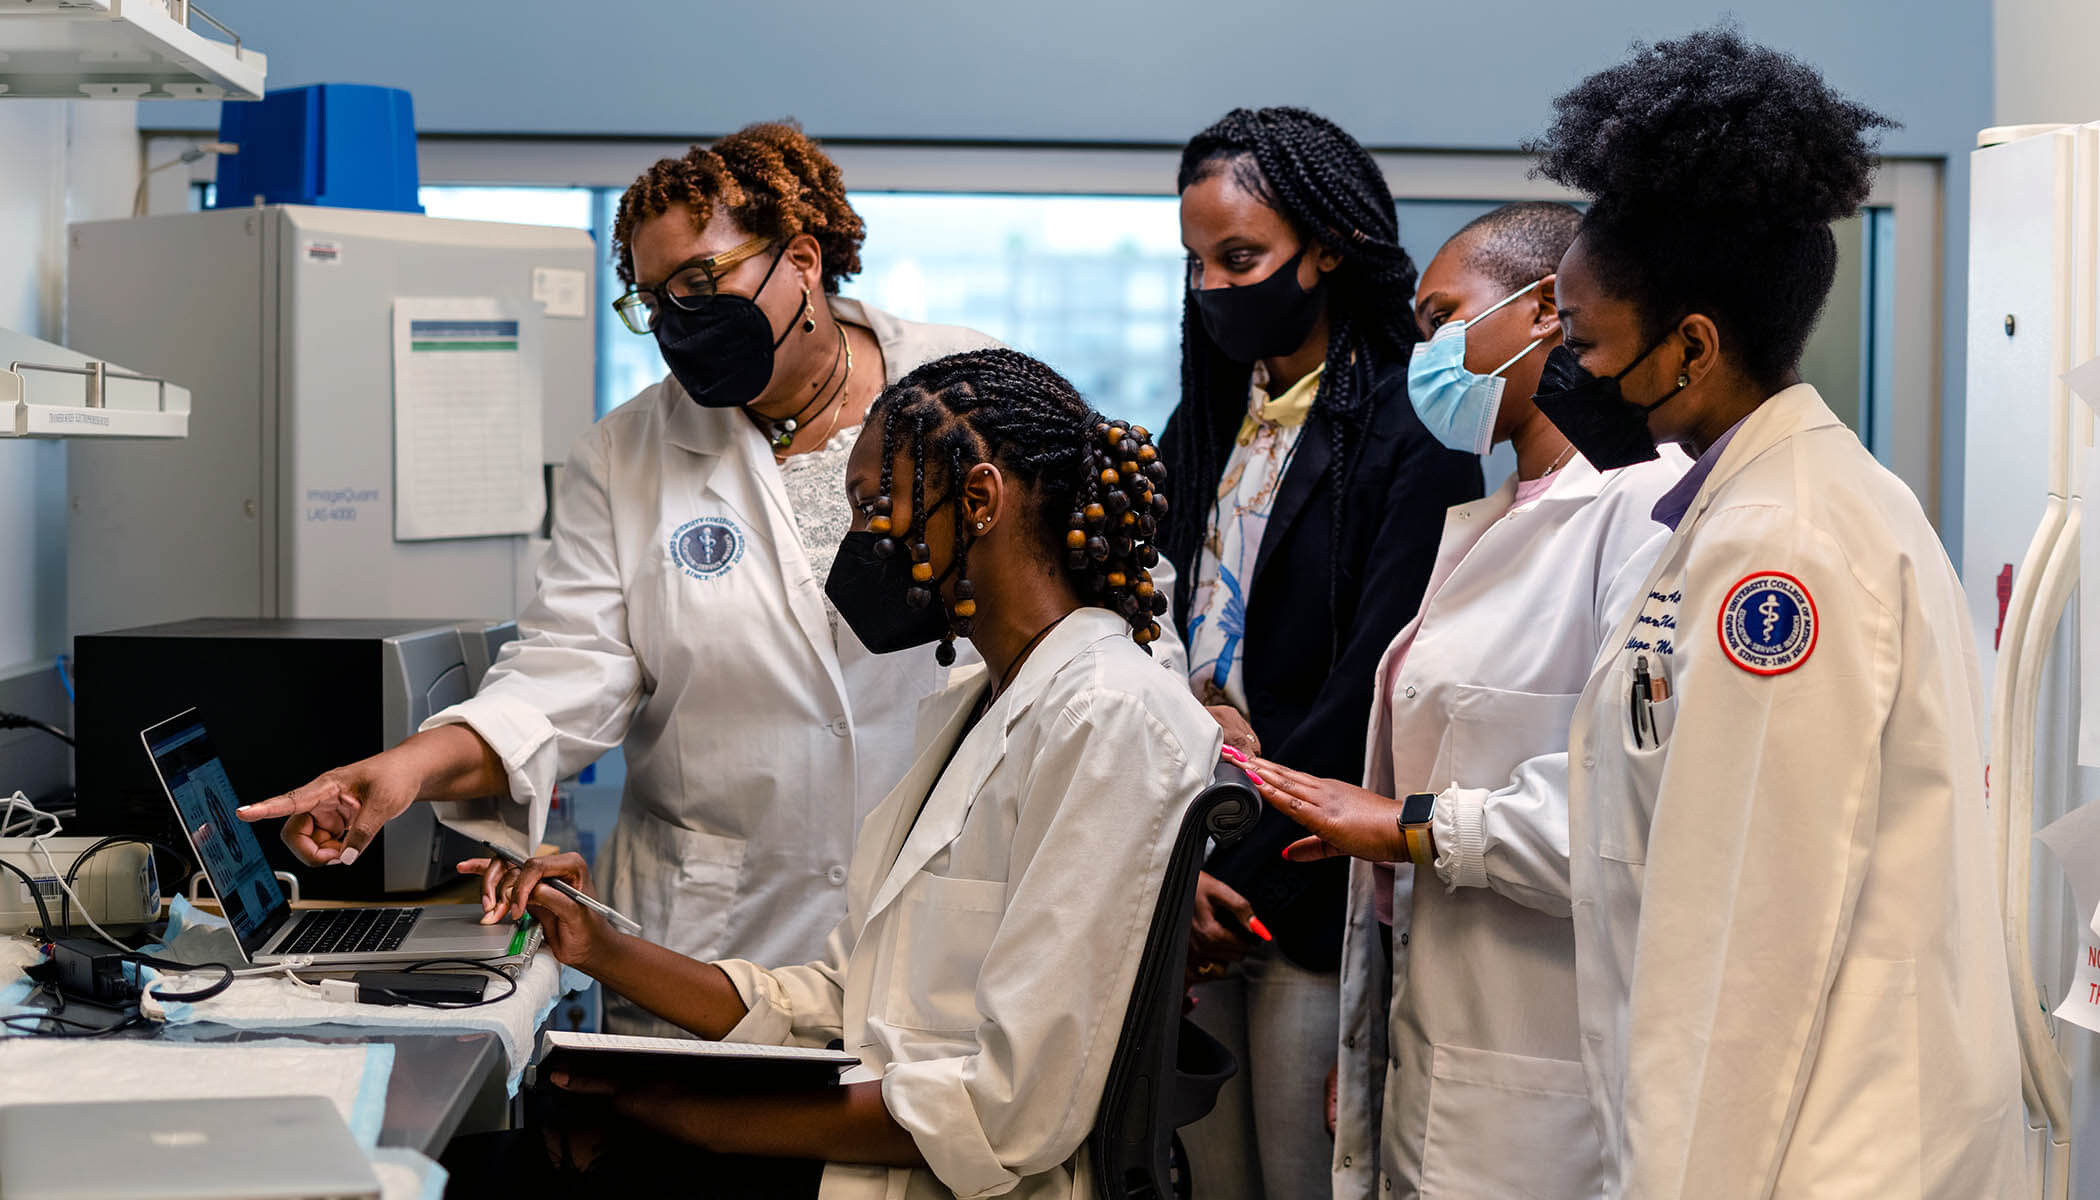 A group of Howard women researchers wearing lab coats look at a laptop in a lab.